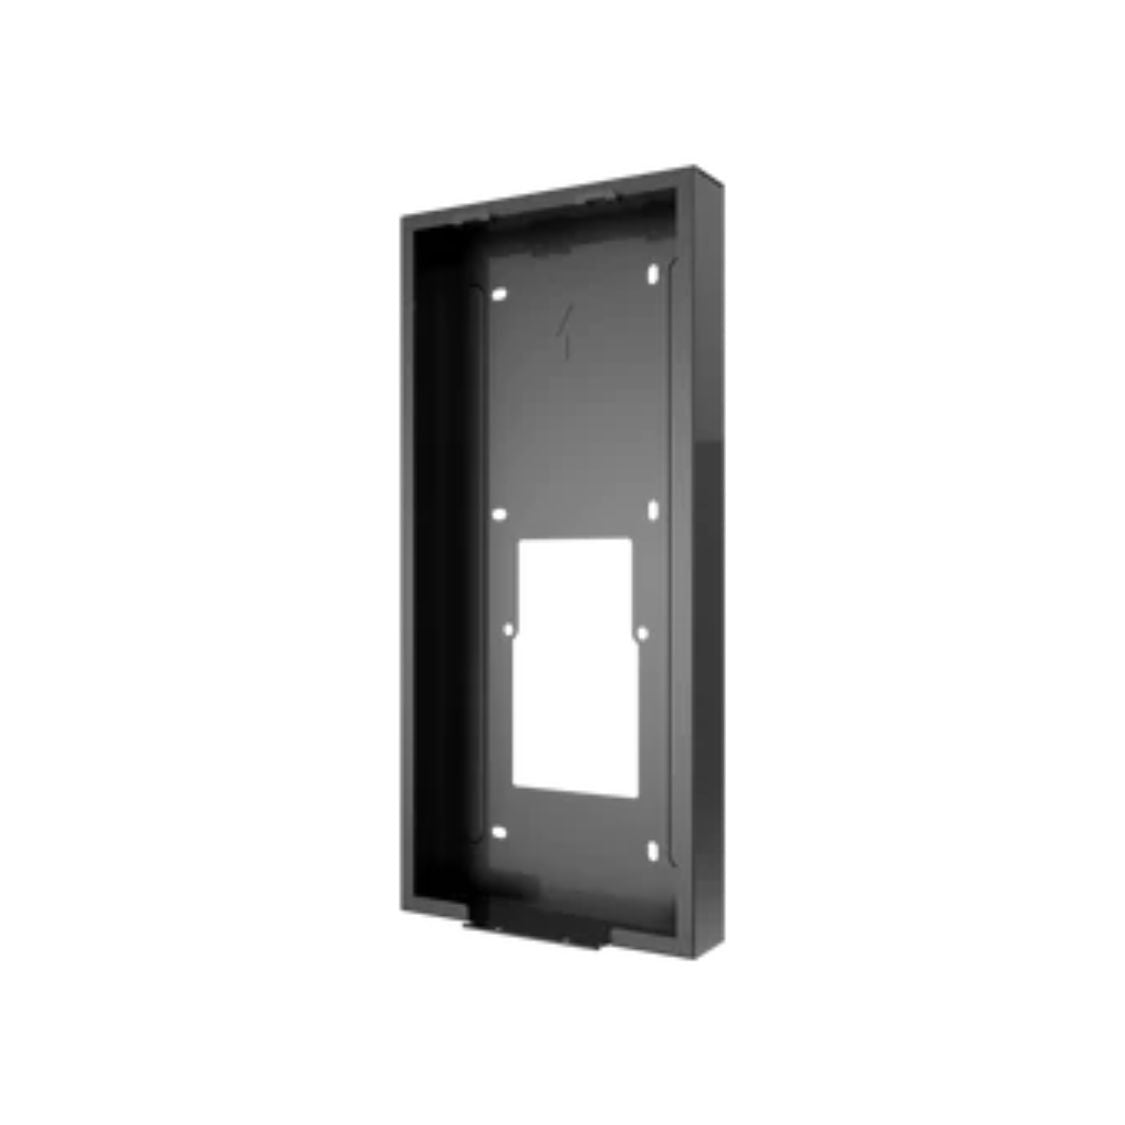 AKUVOX ON-WALL BOX FOR R27